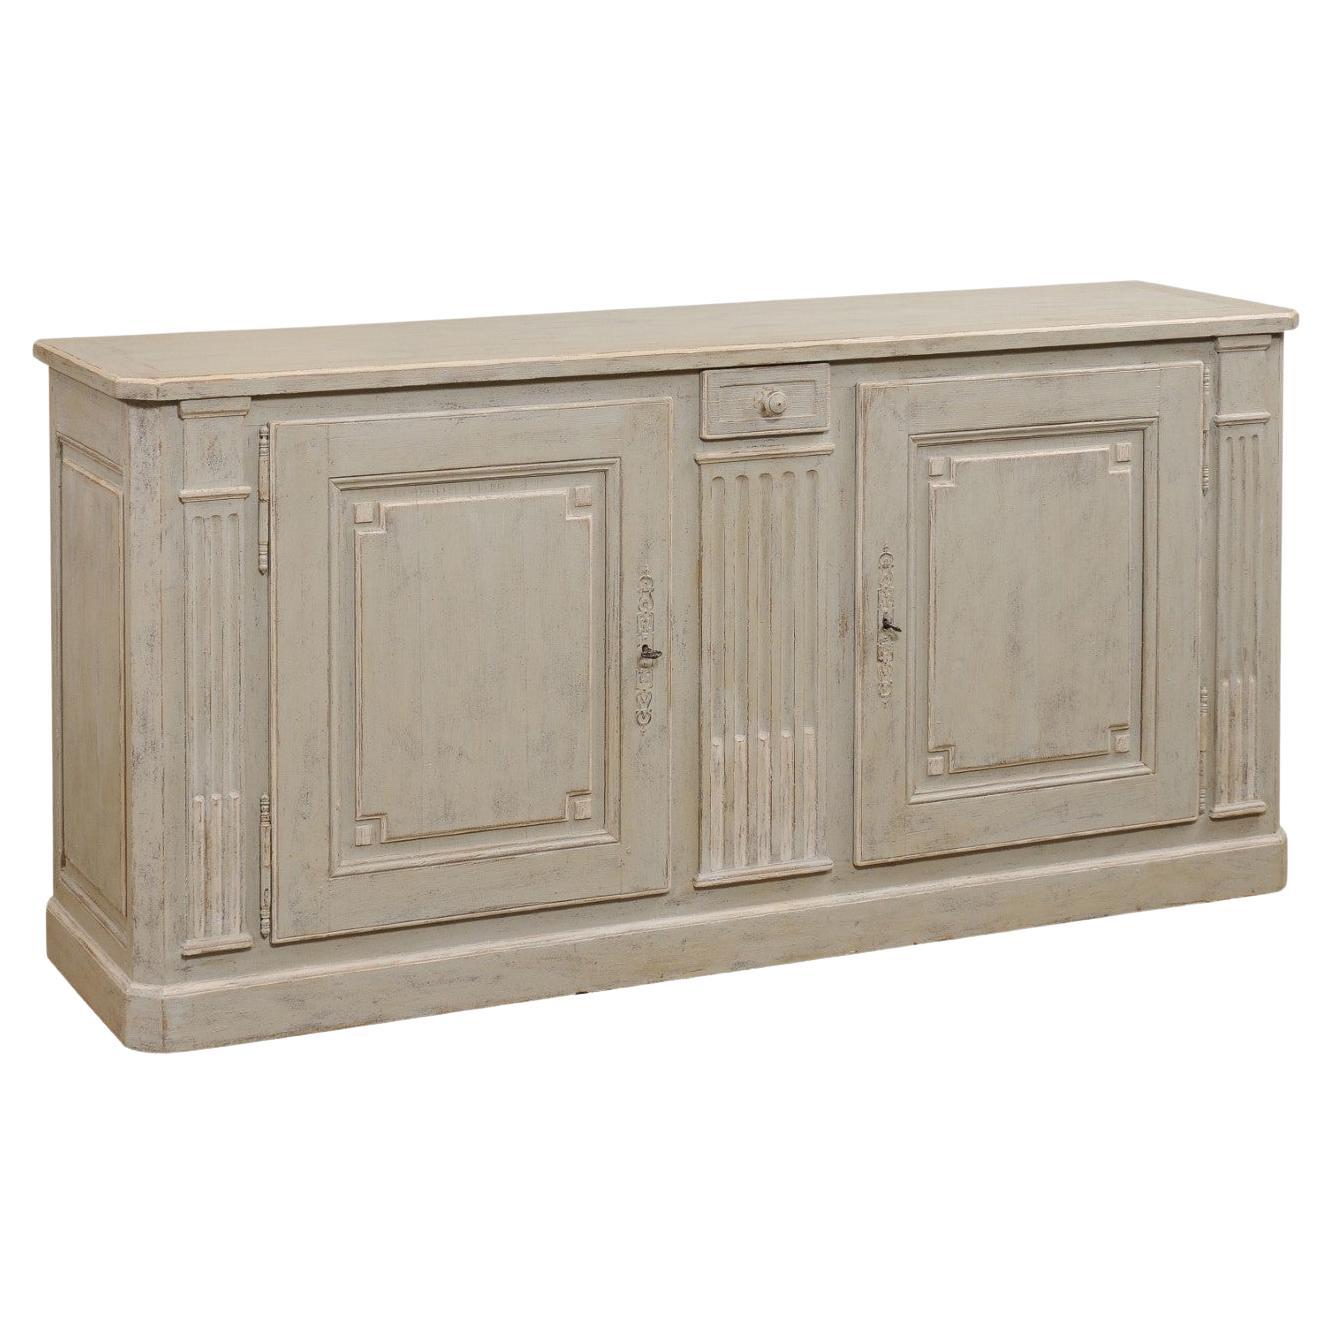 French Louis XVI Style Painted Buffet with Doors, Drawers and Carved Pilasters